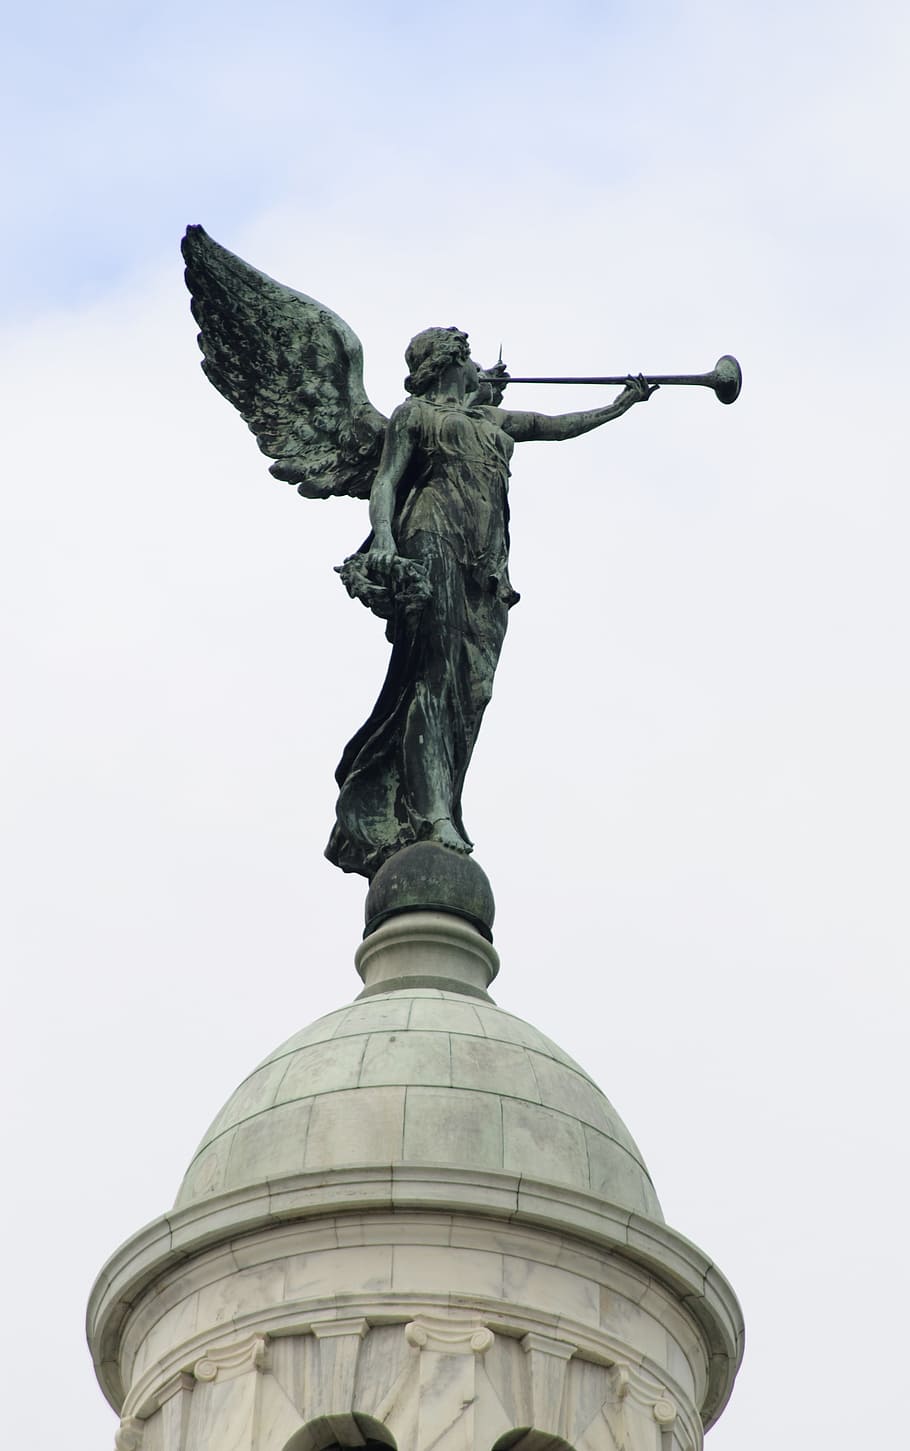 Statue, Wings, Sky, Dome, Fairy, sky, dome, bulding, angel, architecture, landmark